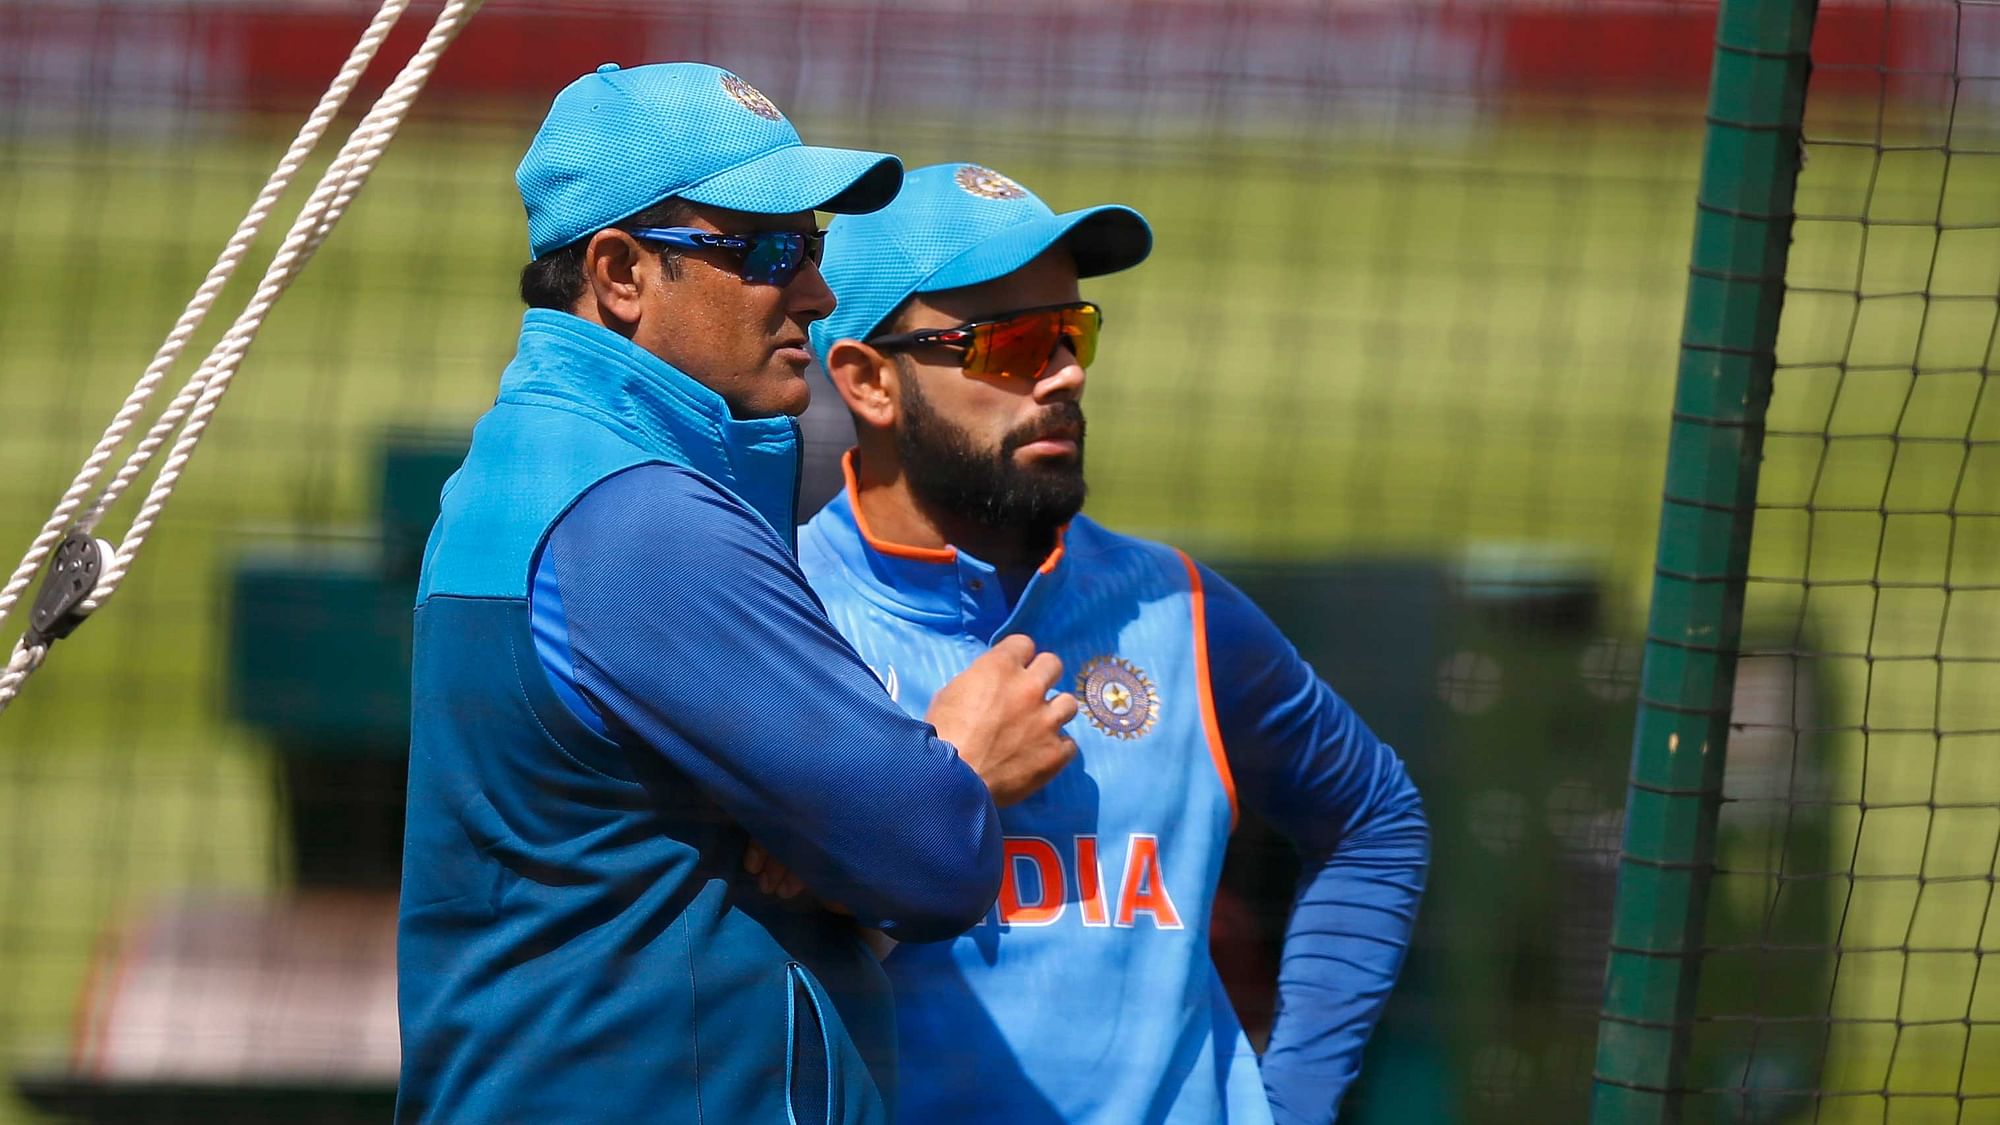 Anil Kumble and Virat Kohli at India’s practise session before the Sri Lanka fixture in the Champions Trophy. (Photo: Reuters)